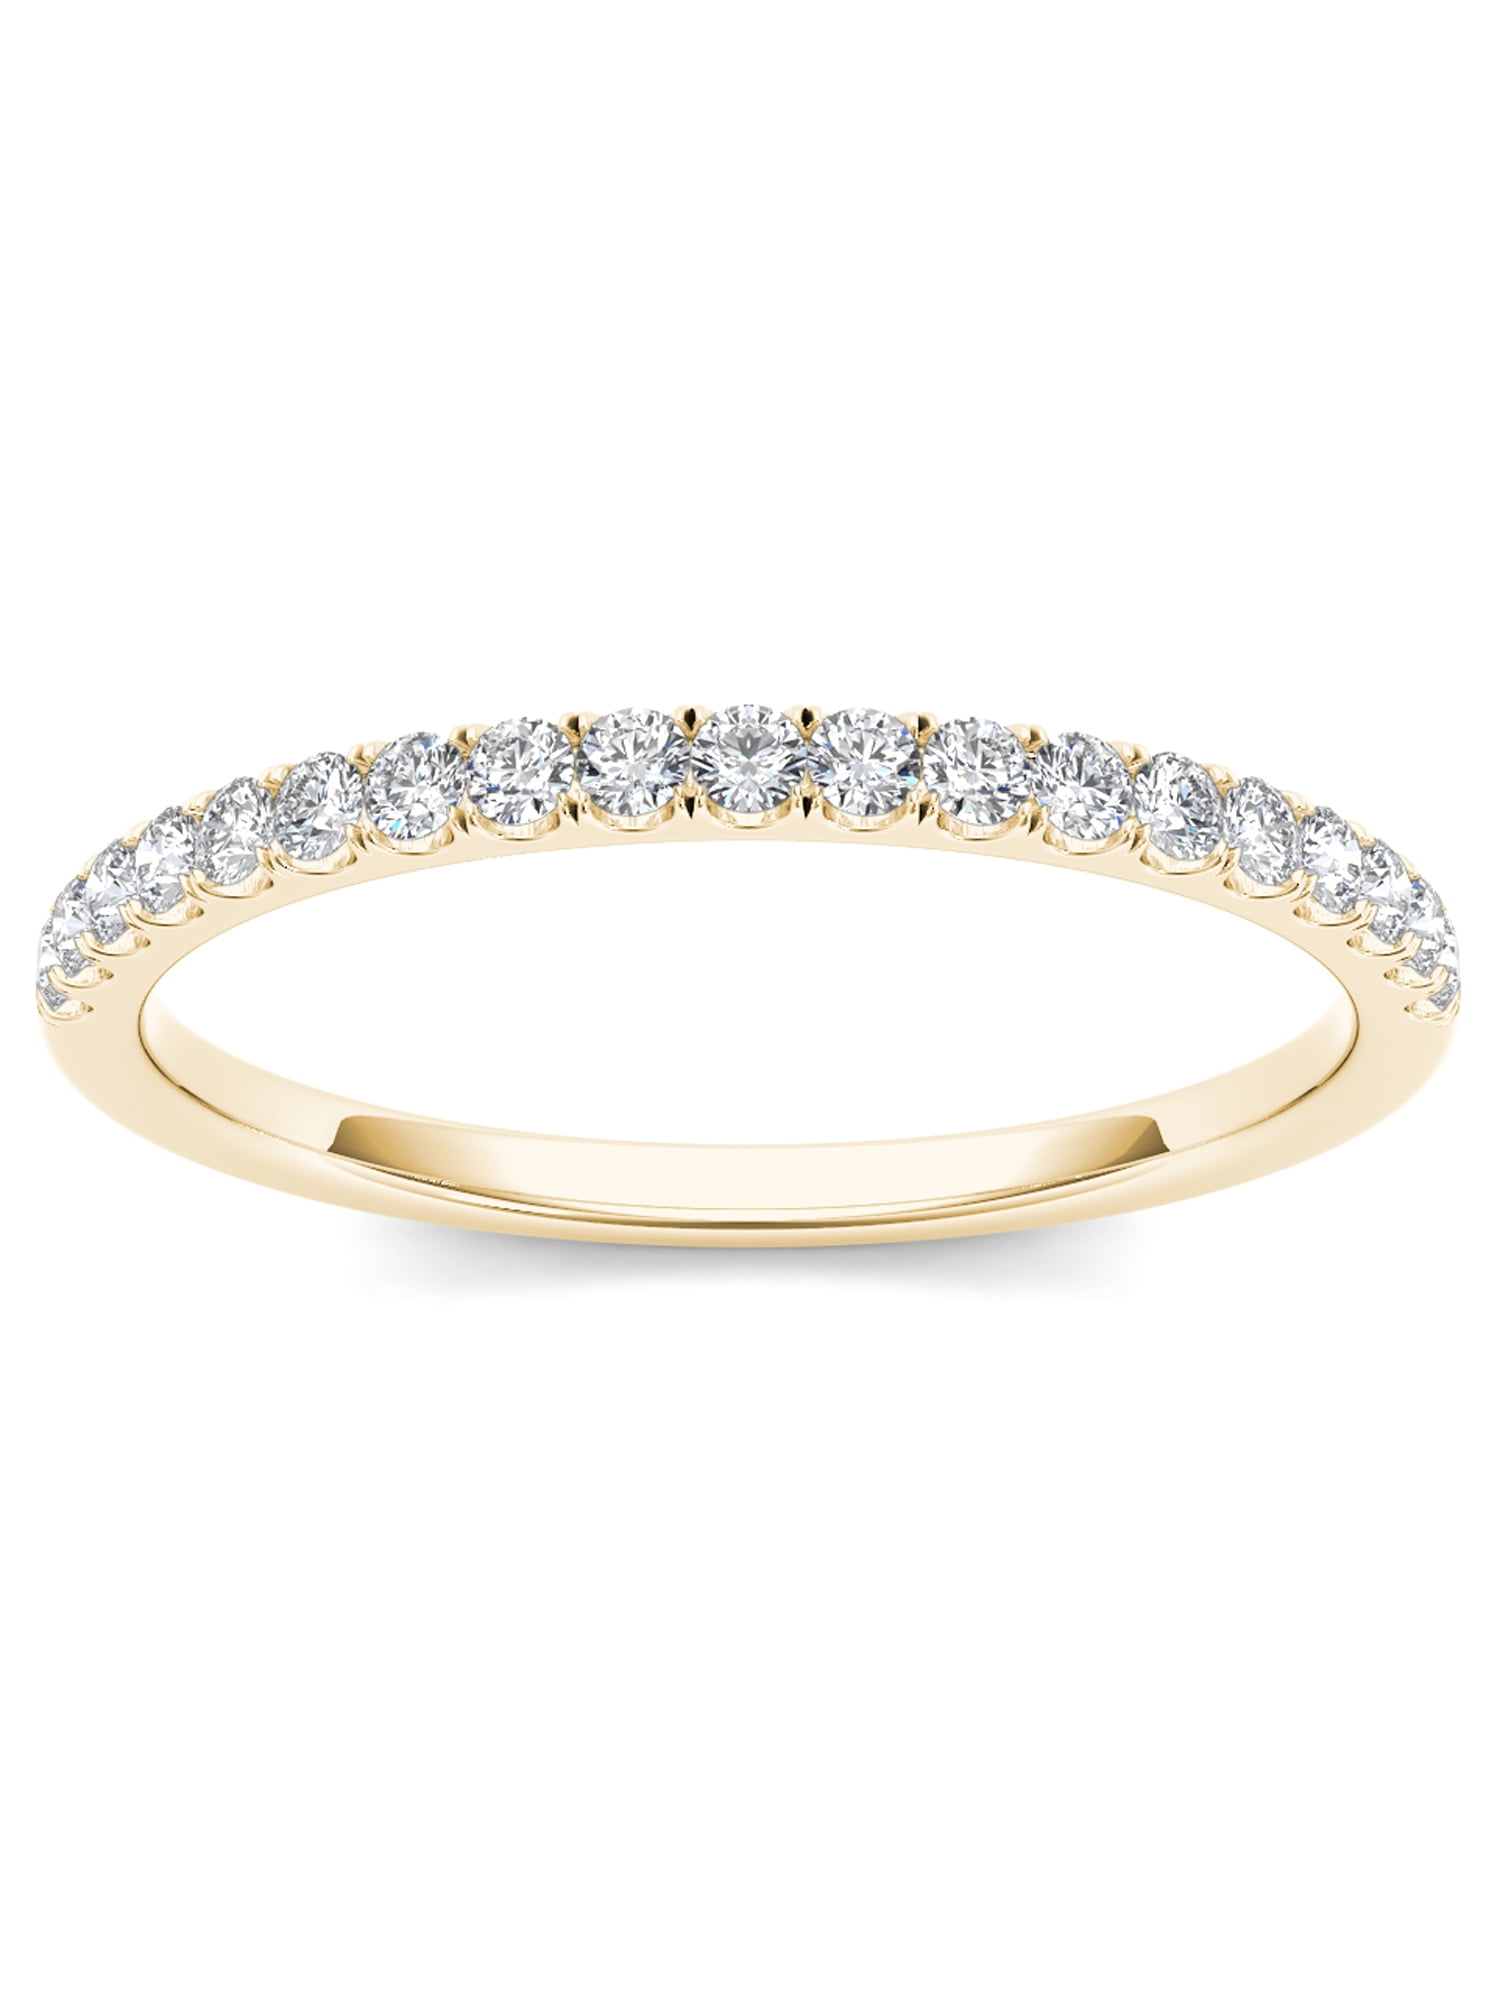 Details about   2.5ct Radiant Cut Yellow CZ Wedding Classic Statement Ring Real 14k Yellow Gold 